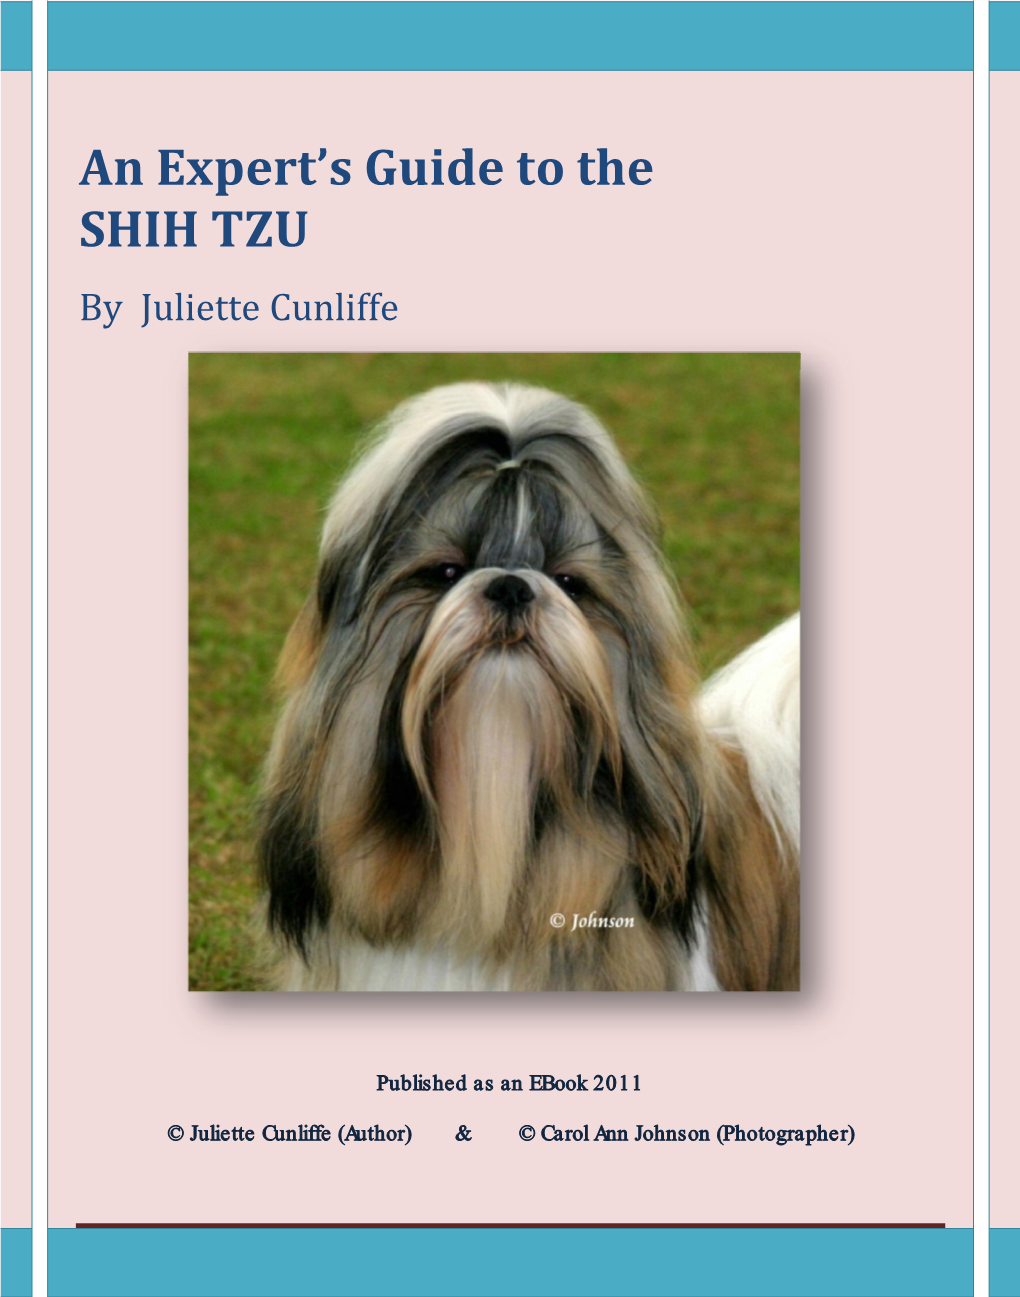 An Expert's Guide to the SHIH